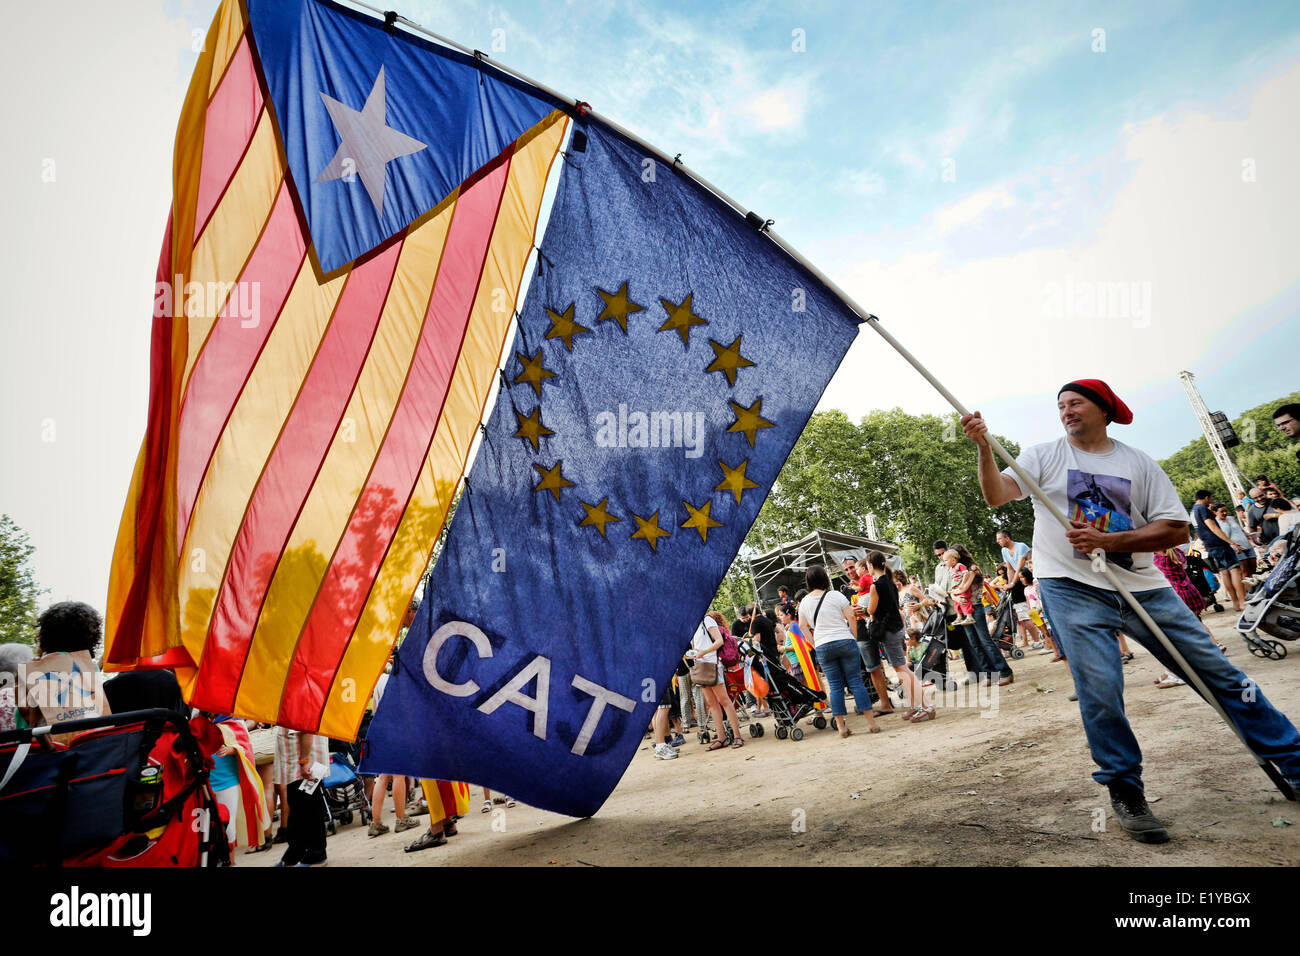 Man waving Catalan Independence Flags at a march for independence in Girona, Catalonia, Spain Stock Photo